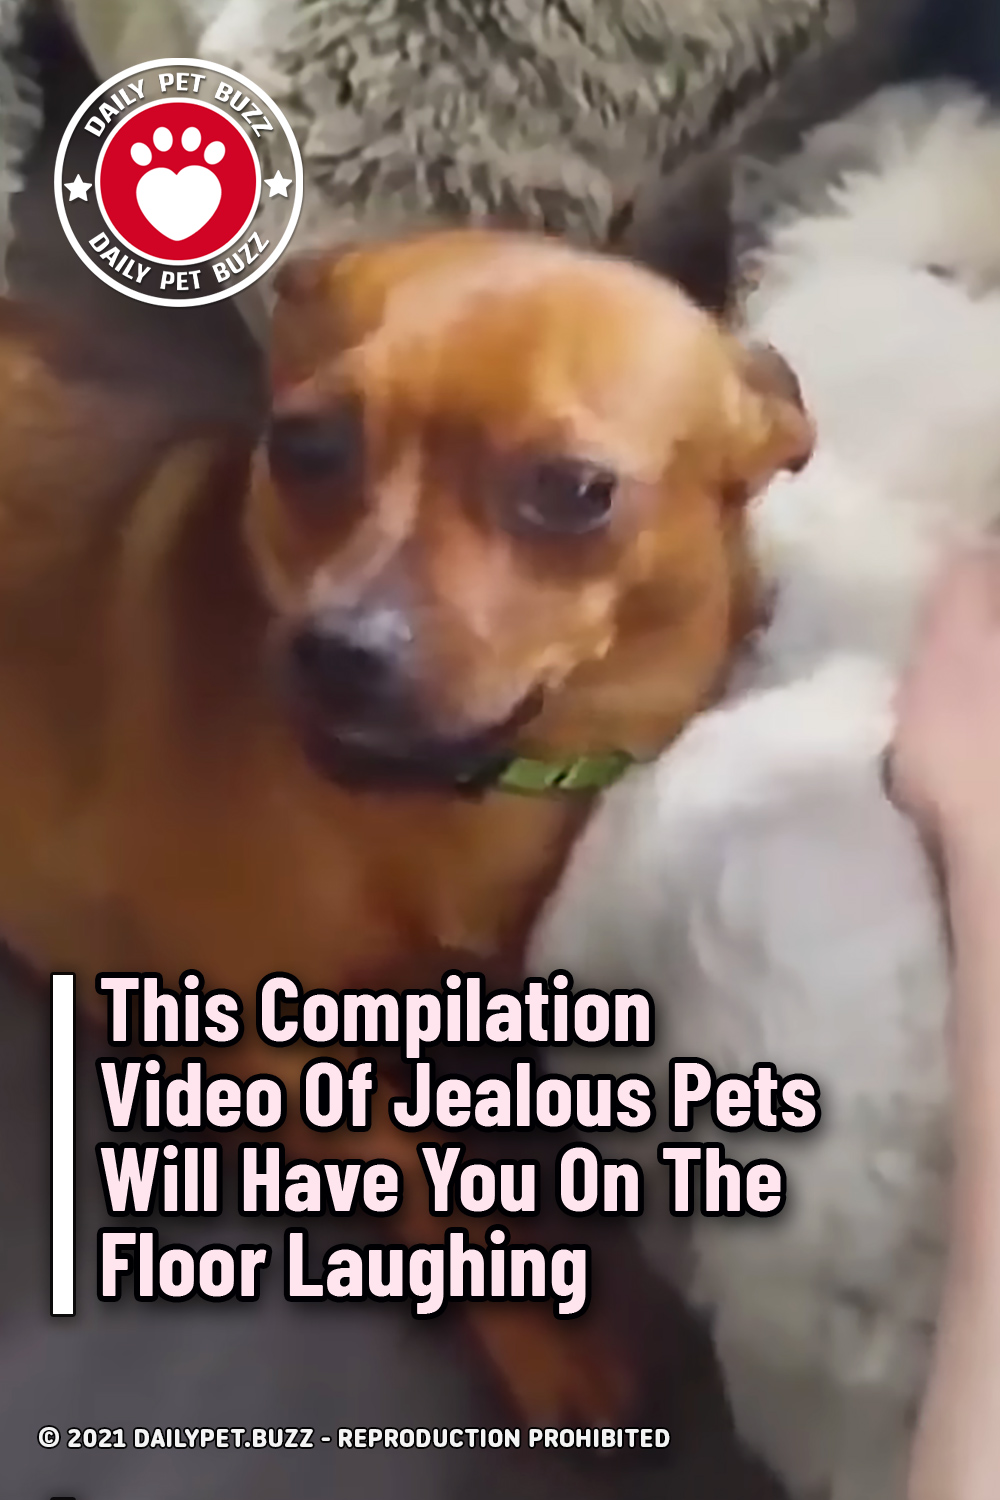 This Compilation Video Of Jealous Pets Will Have You On The Floor Laughing